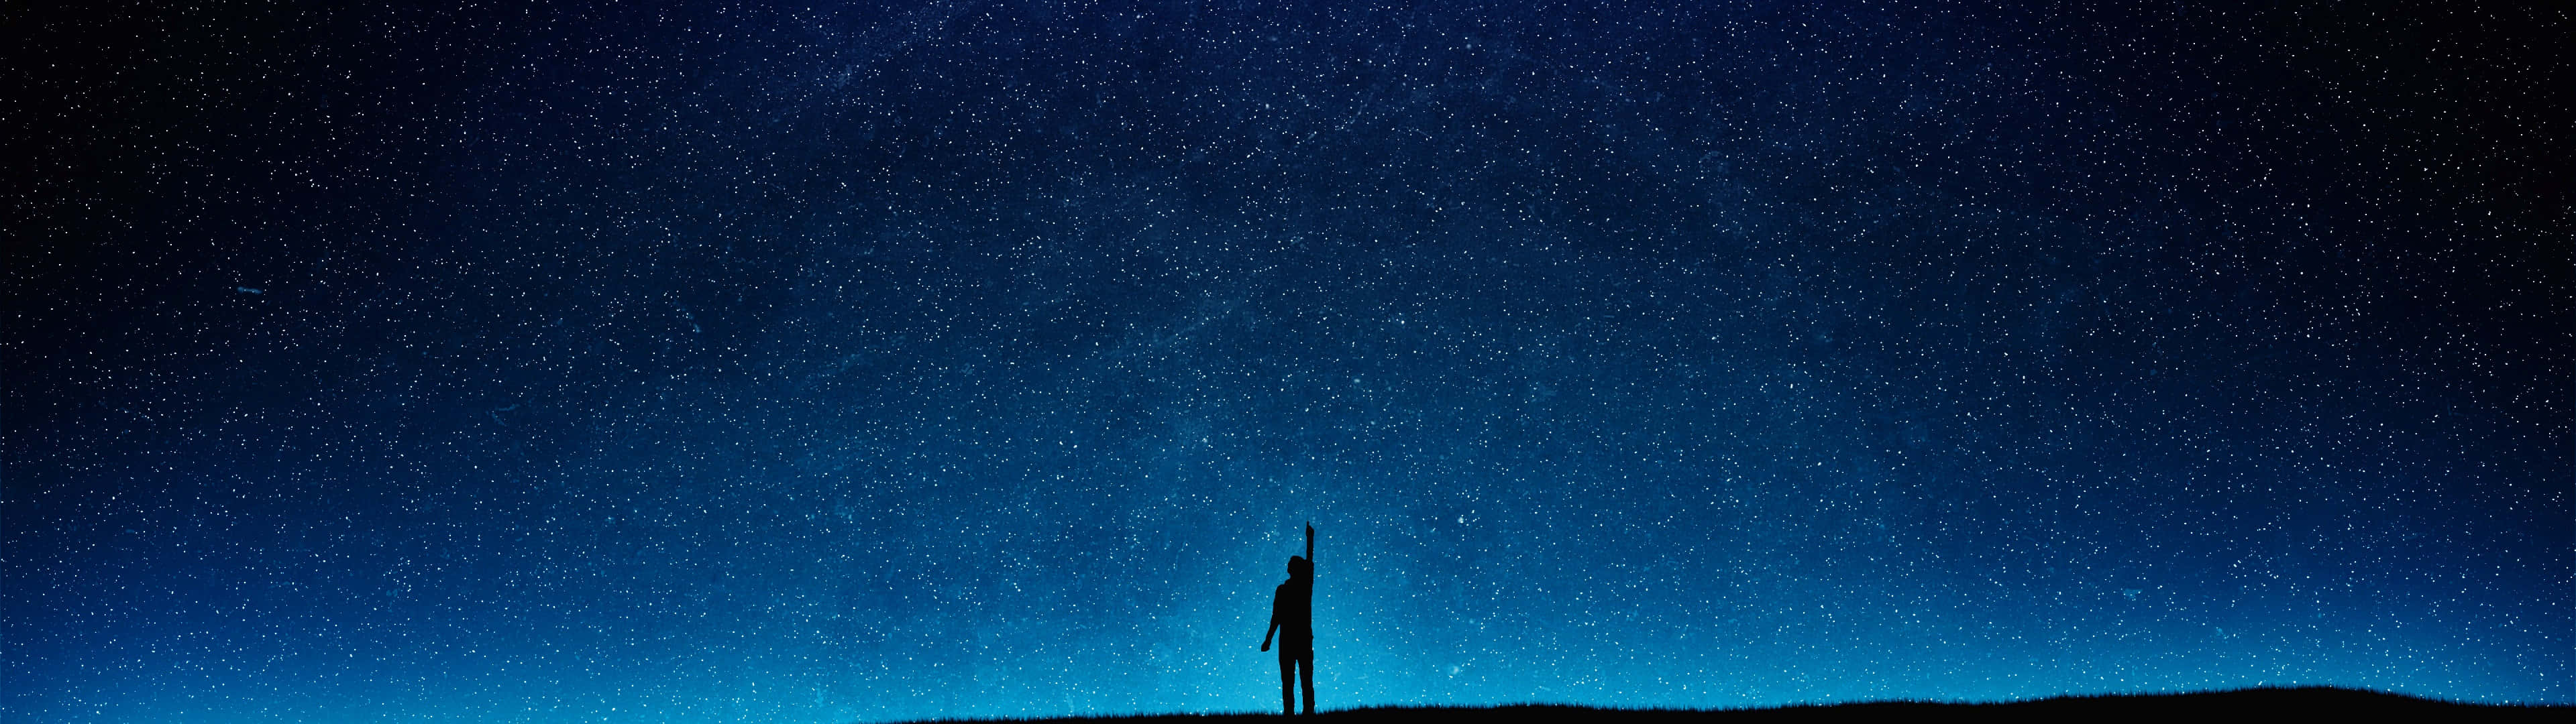 A Sky With Stars Wallpaper